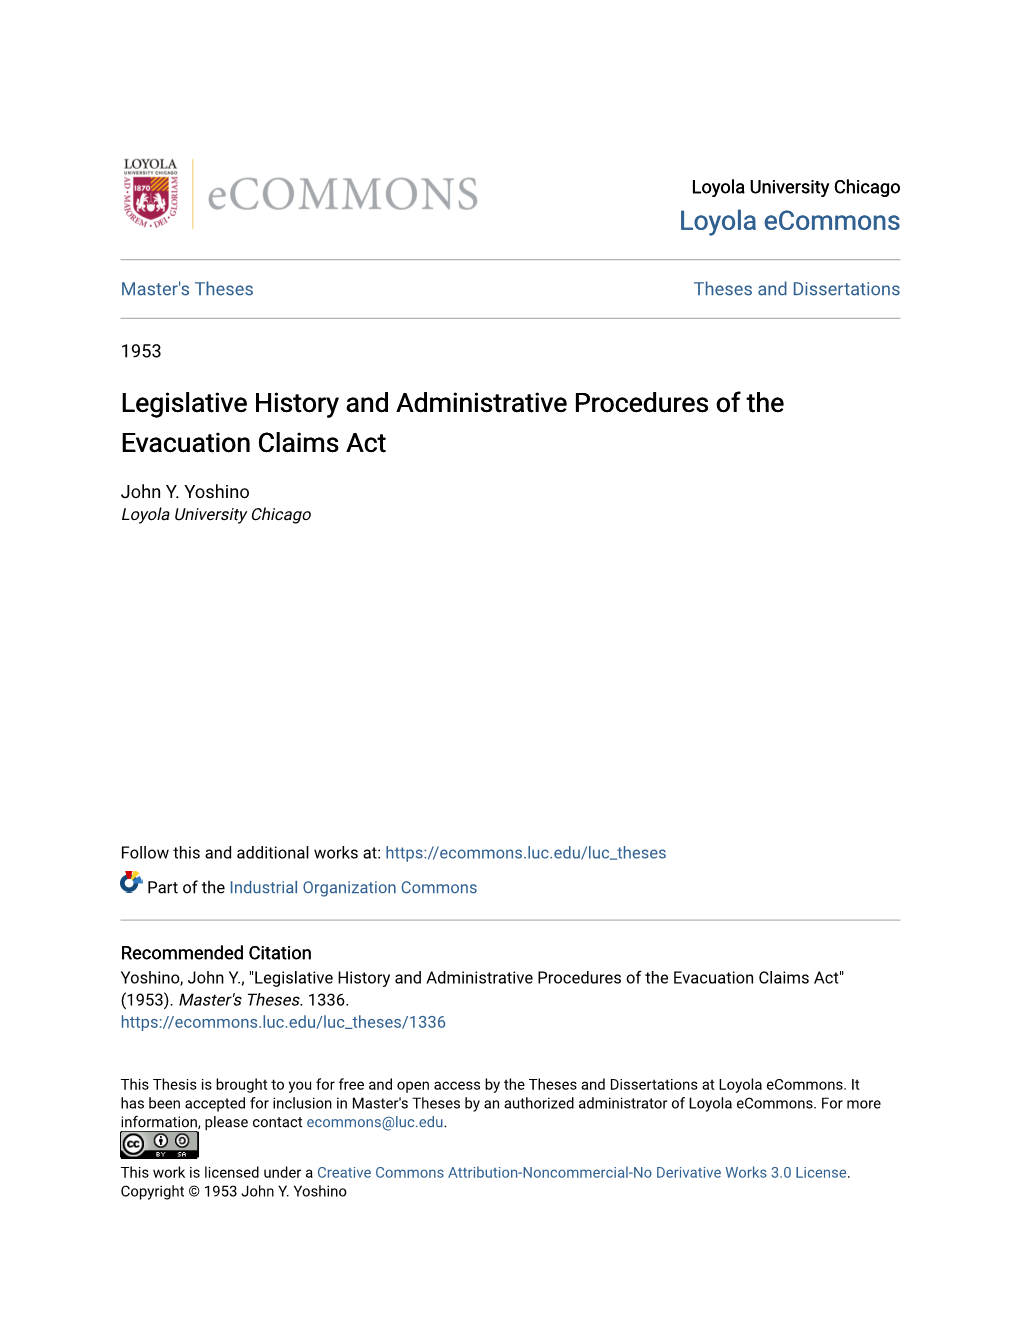 Legislative History and Administrative Procedures of the Evacuation Claims Act